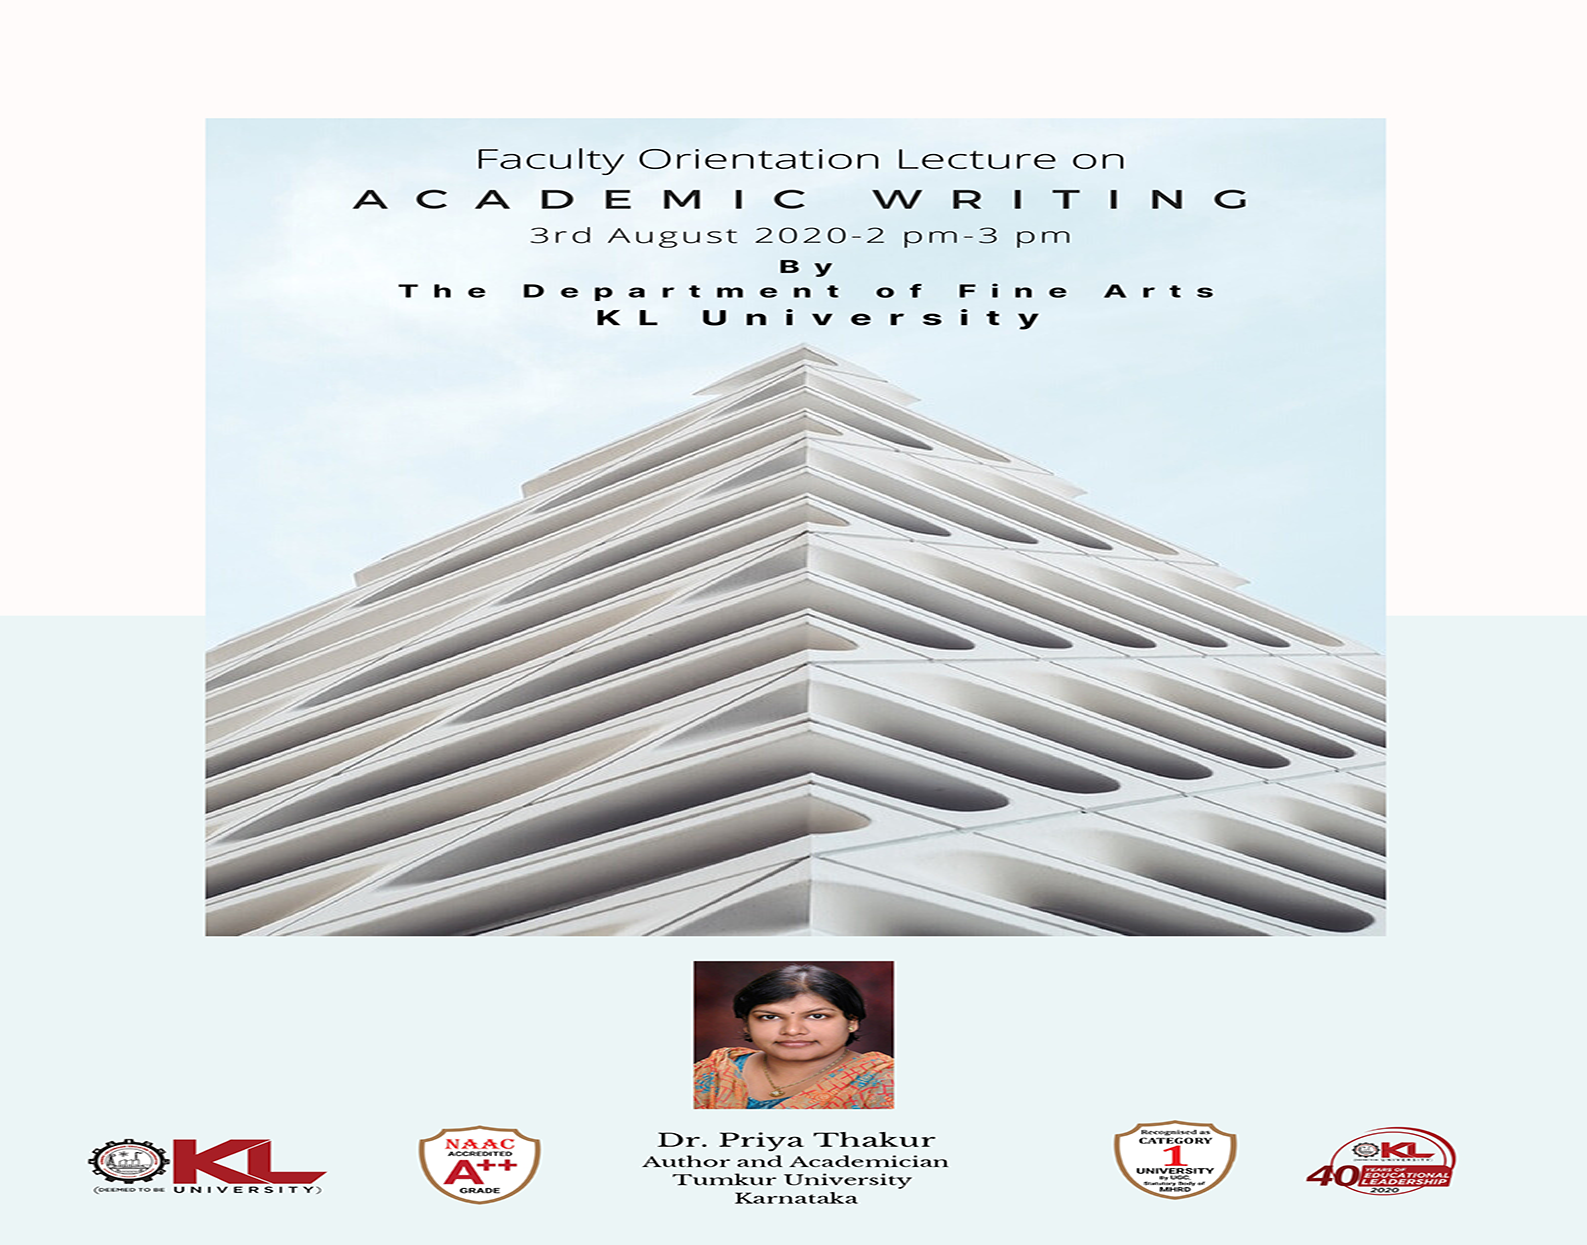 Faculty Orientation Lecture on Academic Writing on 3rd August 2020 